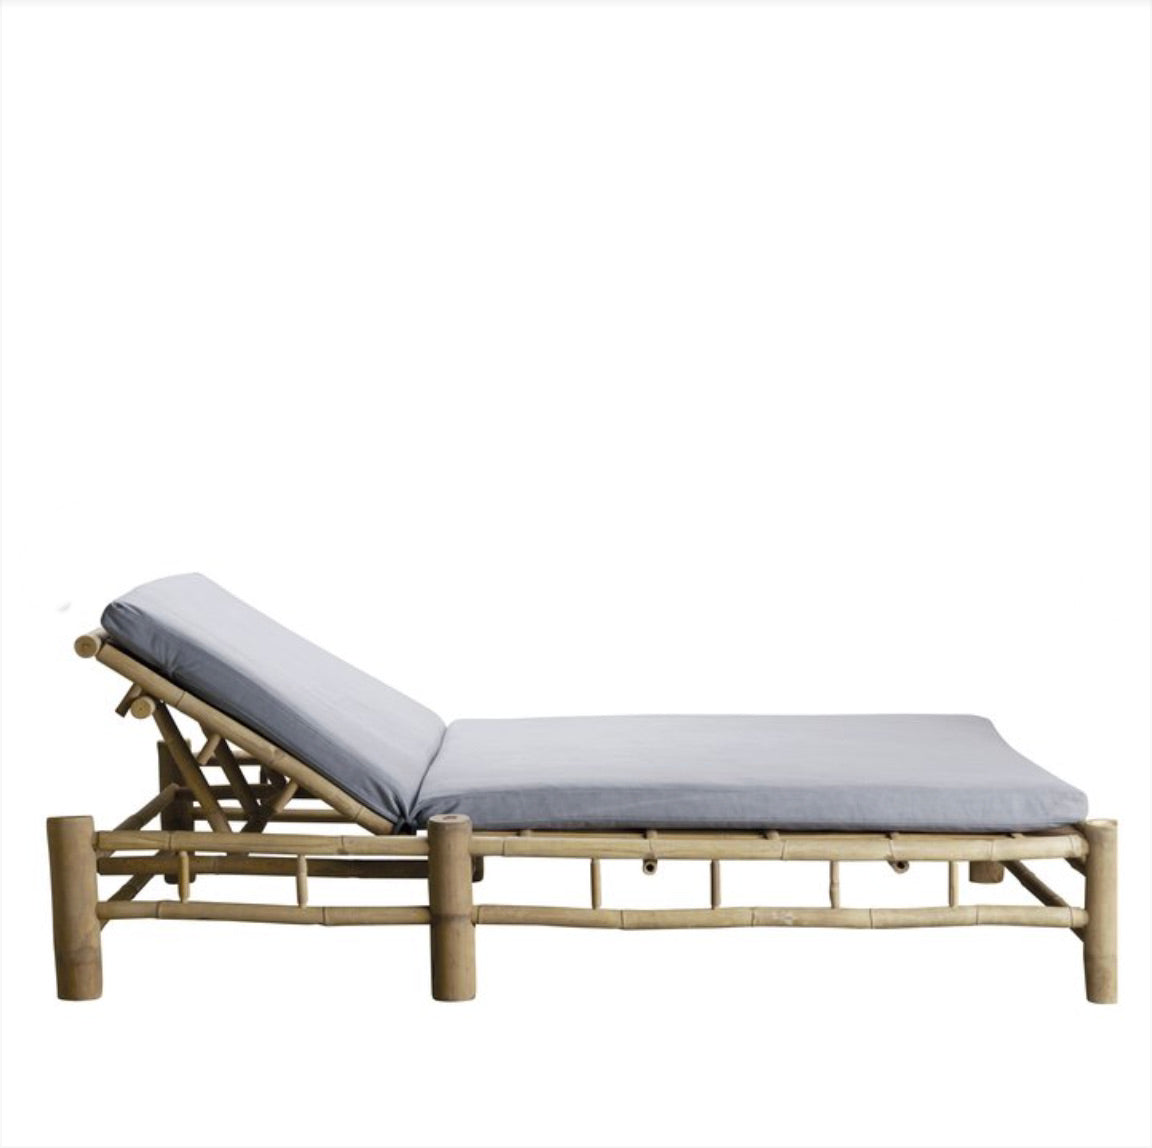 BAMBOO DOUBLE SUNBED - ON ORDER